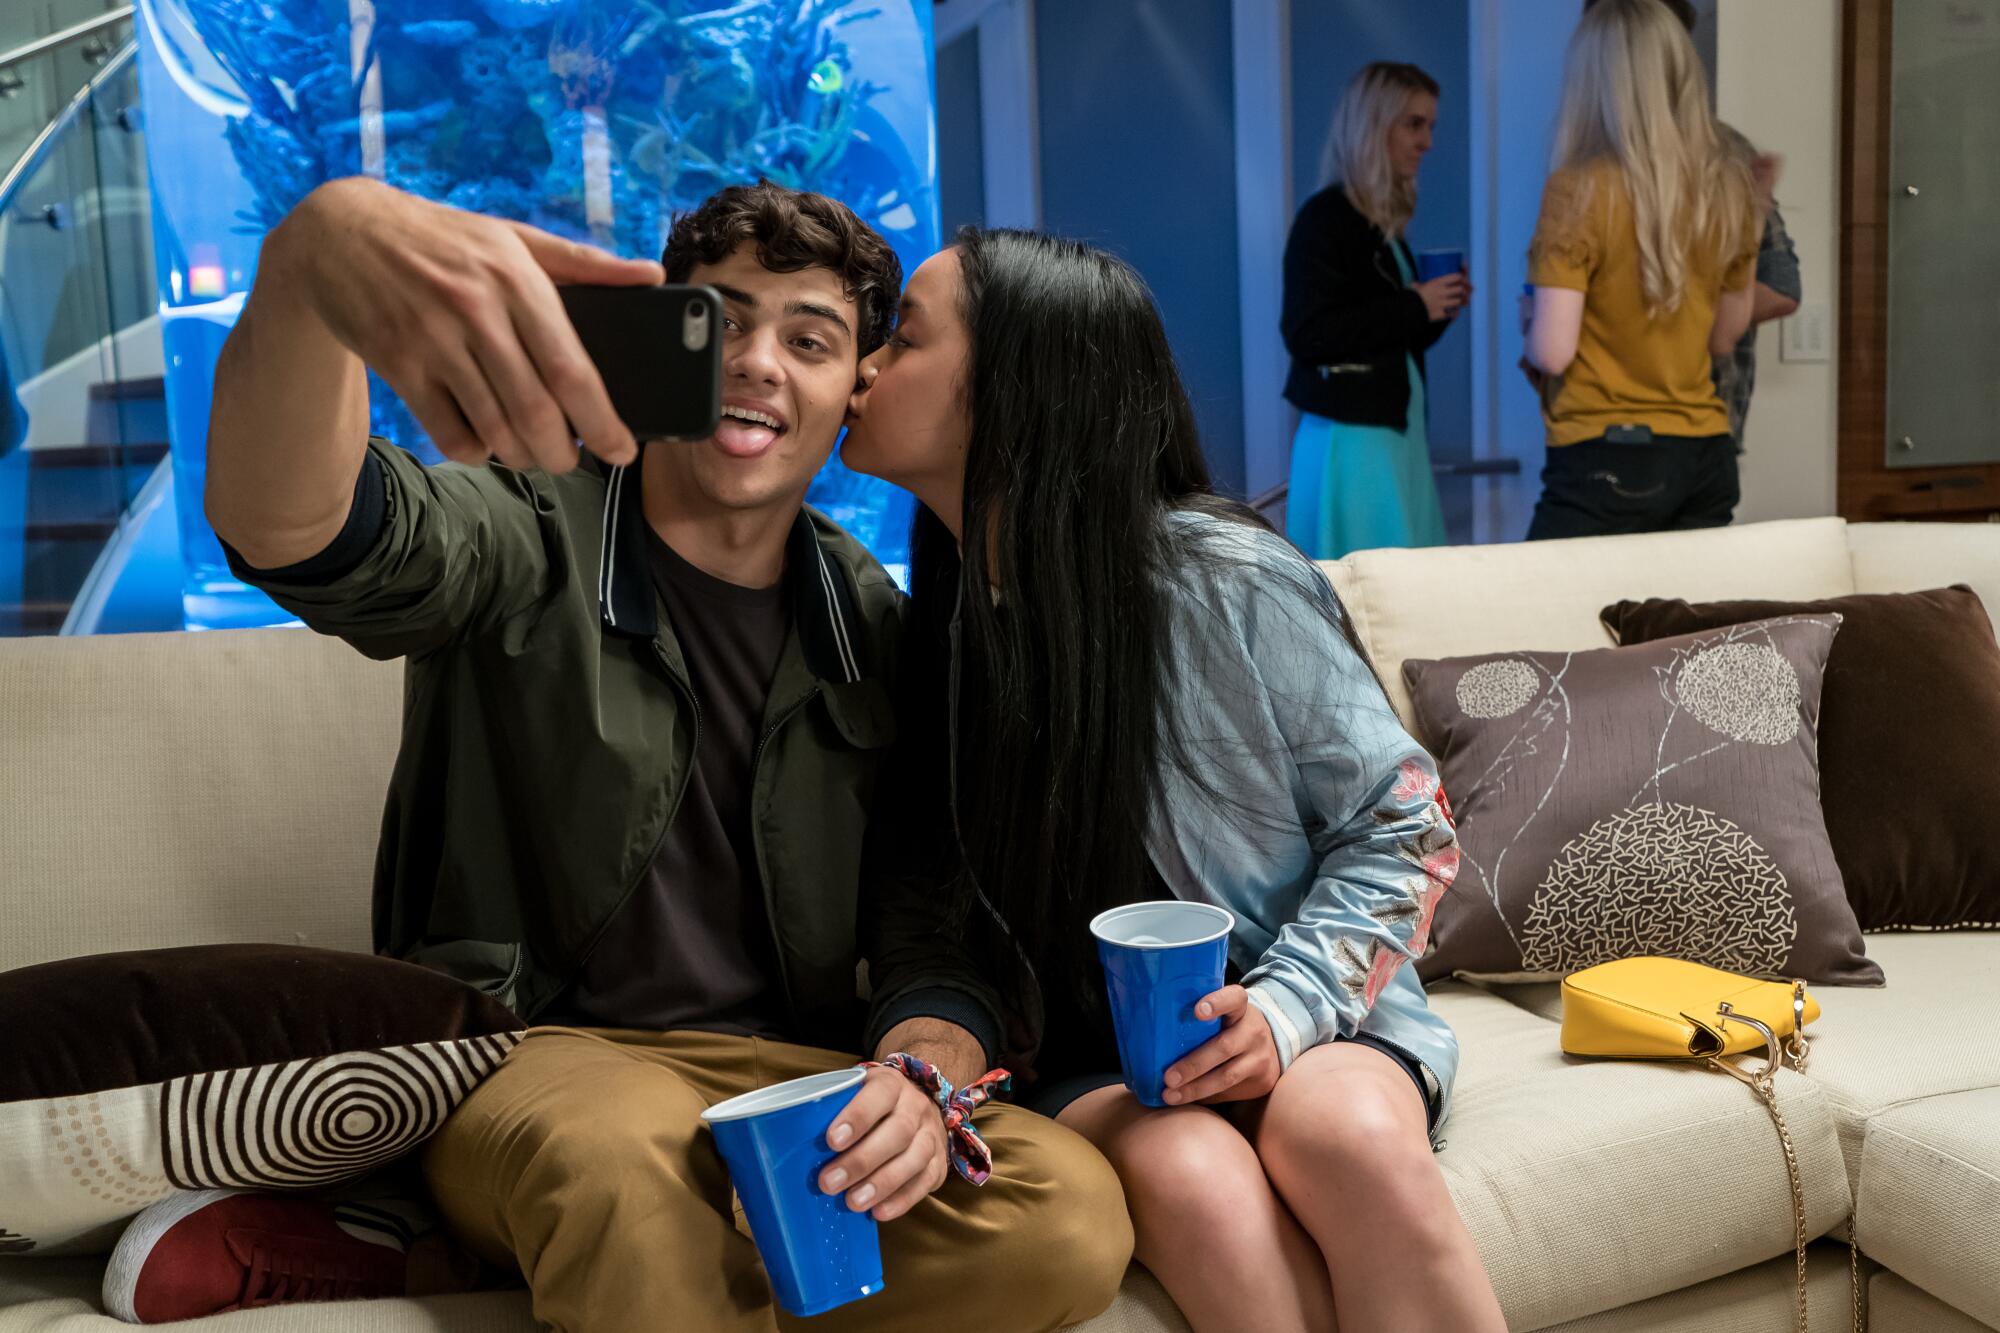 Lana Condor kisses Noah Centineo's cheek in "To All the Boys I've Loved Before."